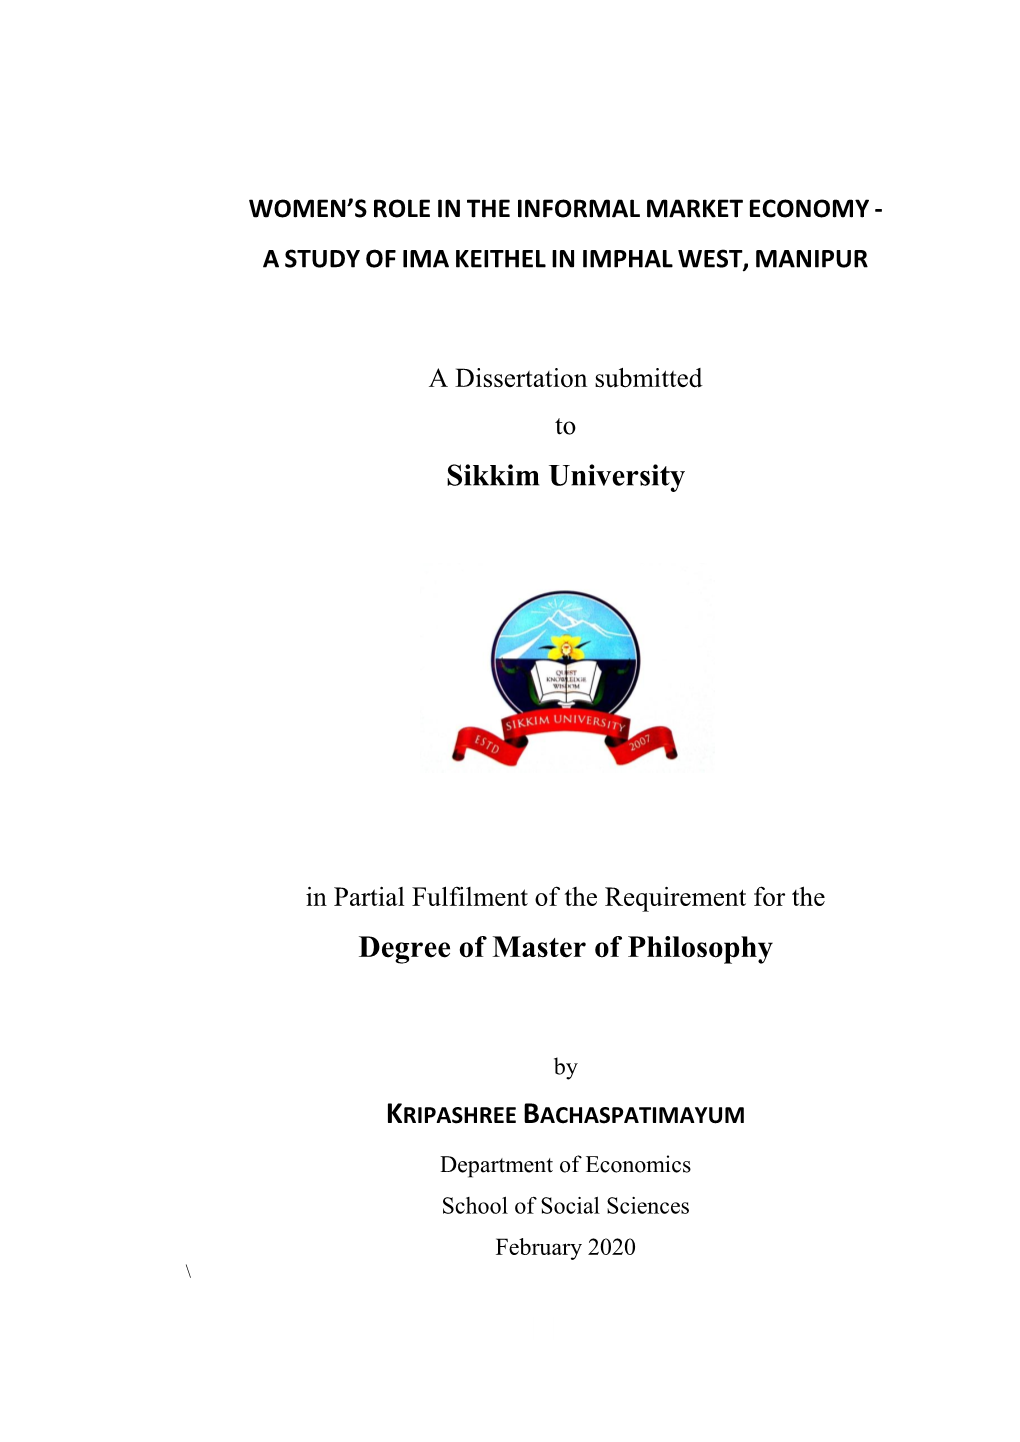 A STUDY of IMA KEITHEL in IMPHAL WEST, MANIPUR a Dissertation Submitted To